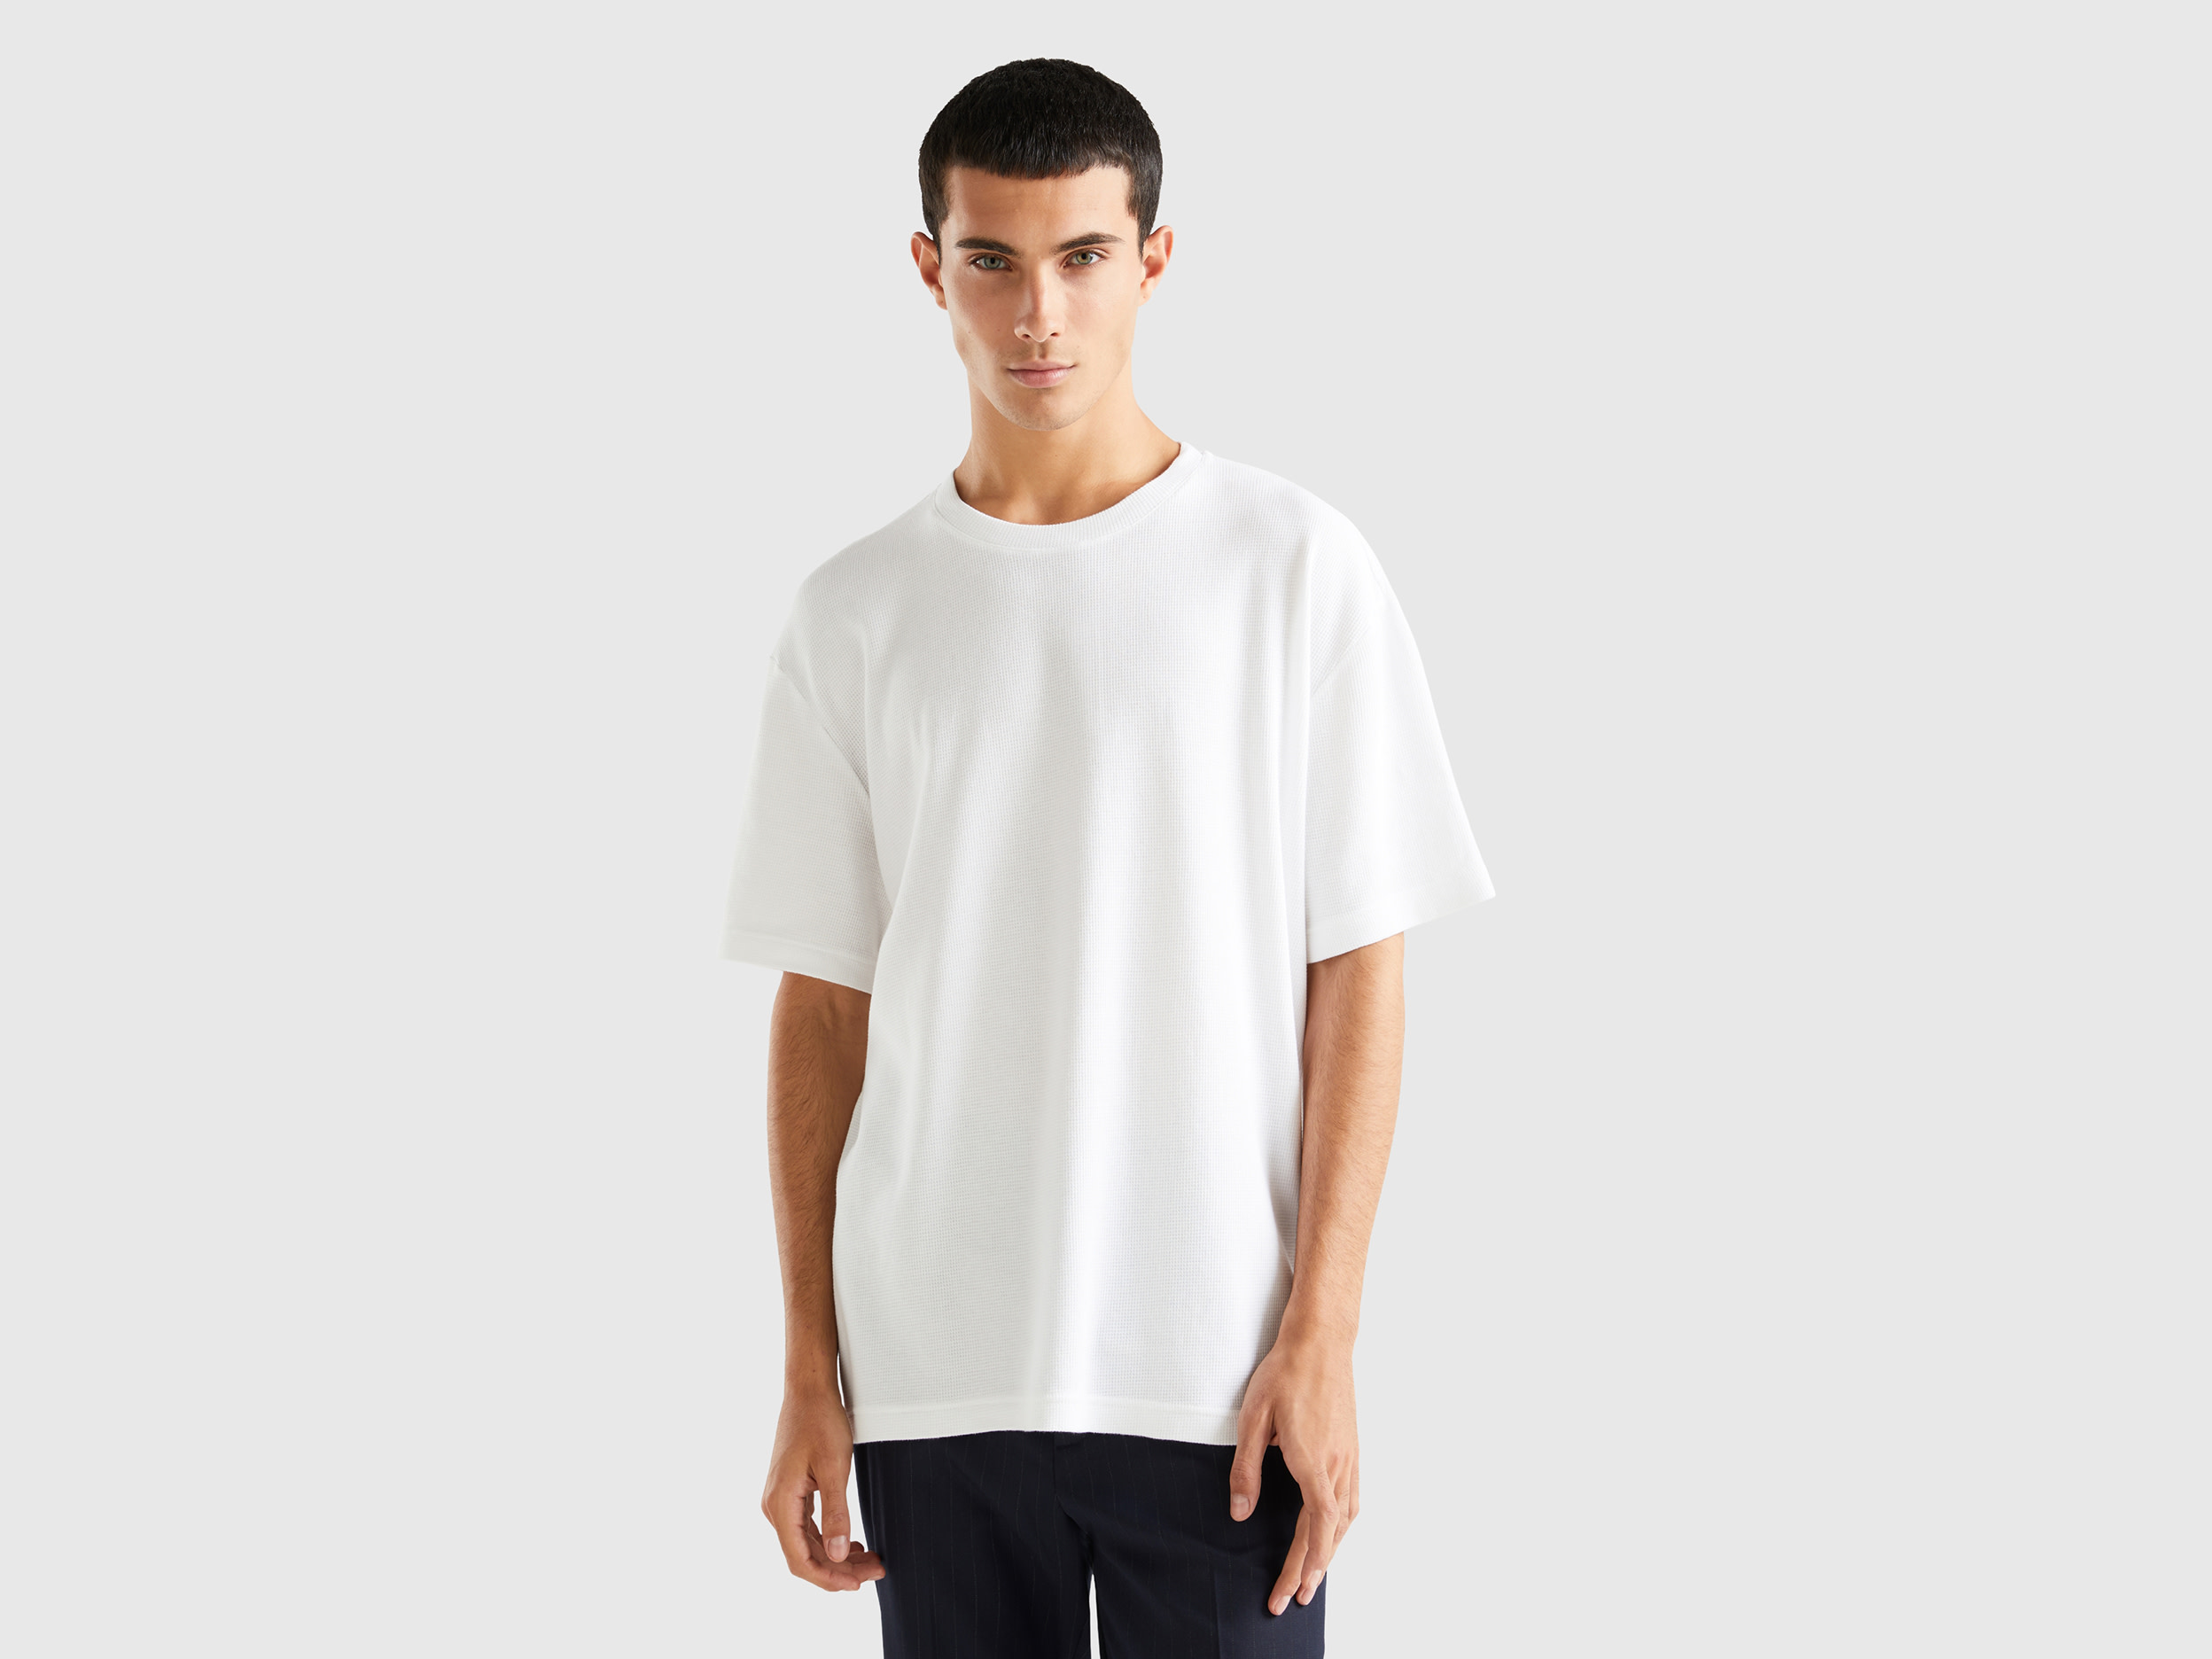 Benetton, Relaxed Fit T-shirt, size XS, Creamy White, Men